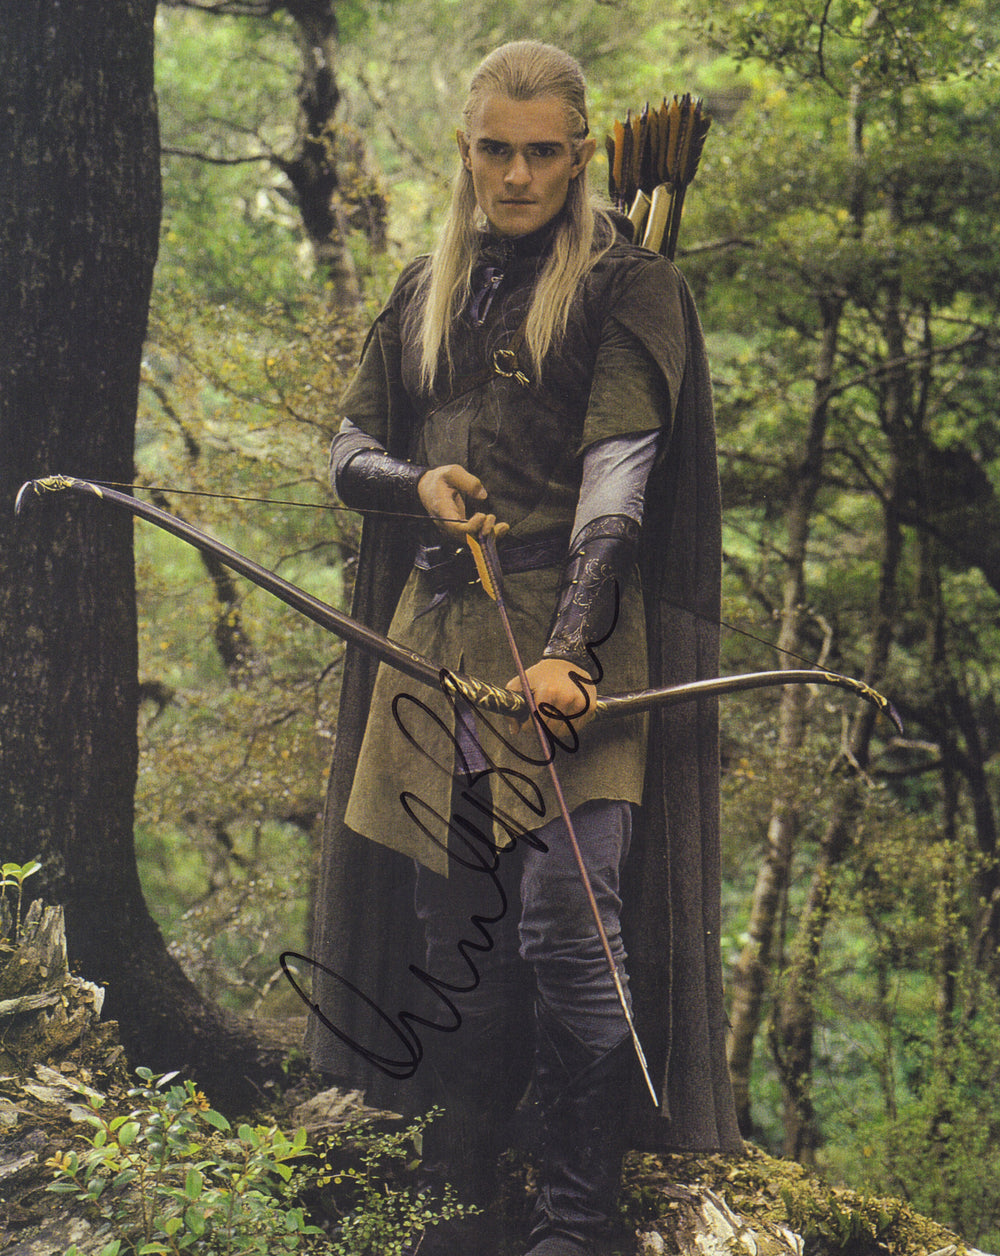 Orlando Bloom as Legolas in The Lord of the Rings: The Fellowship of the Ring Signed 8x10 Photo